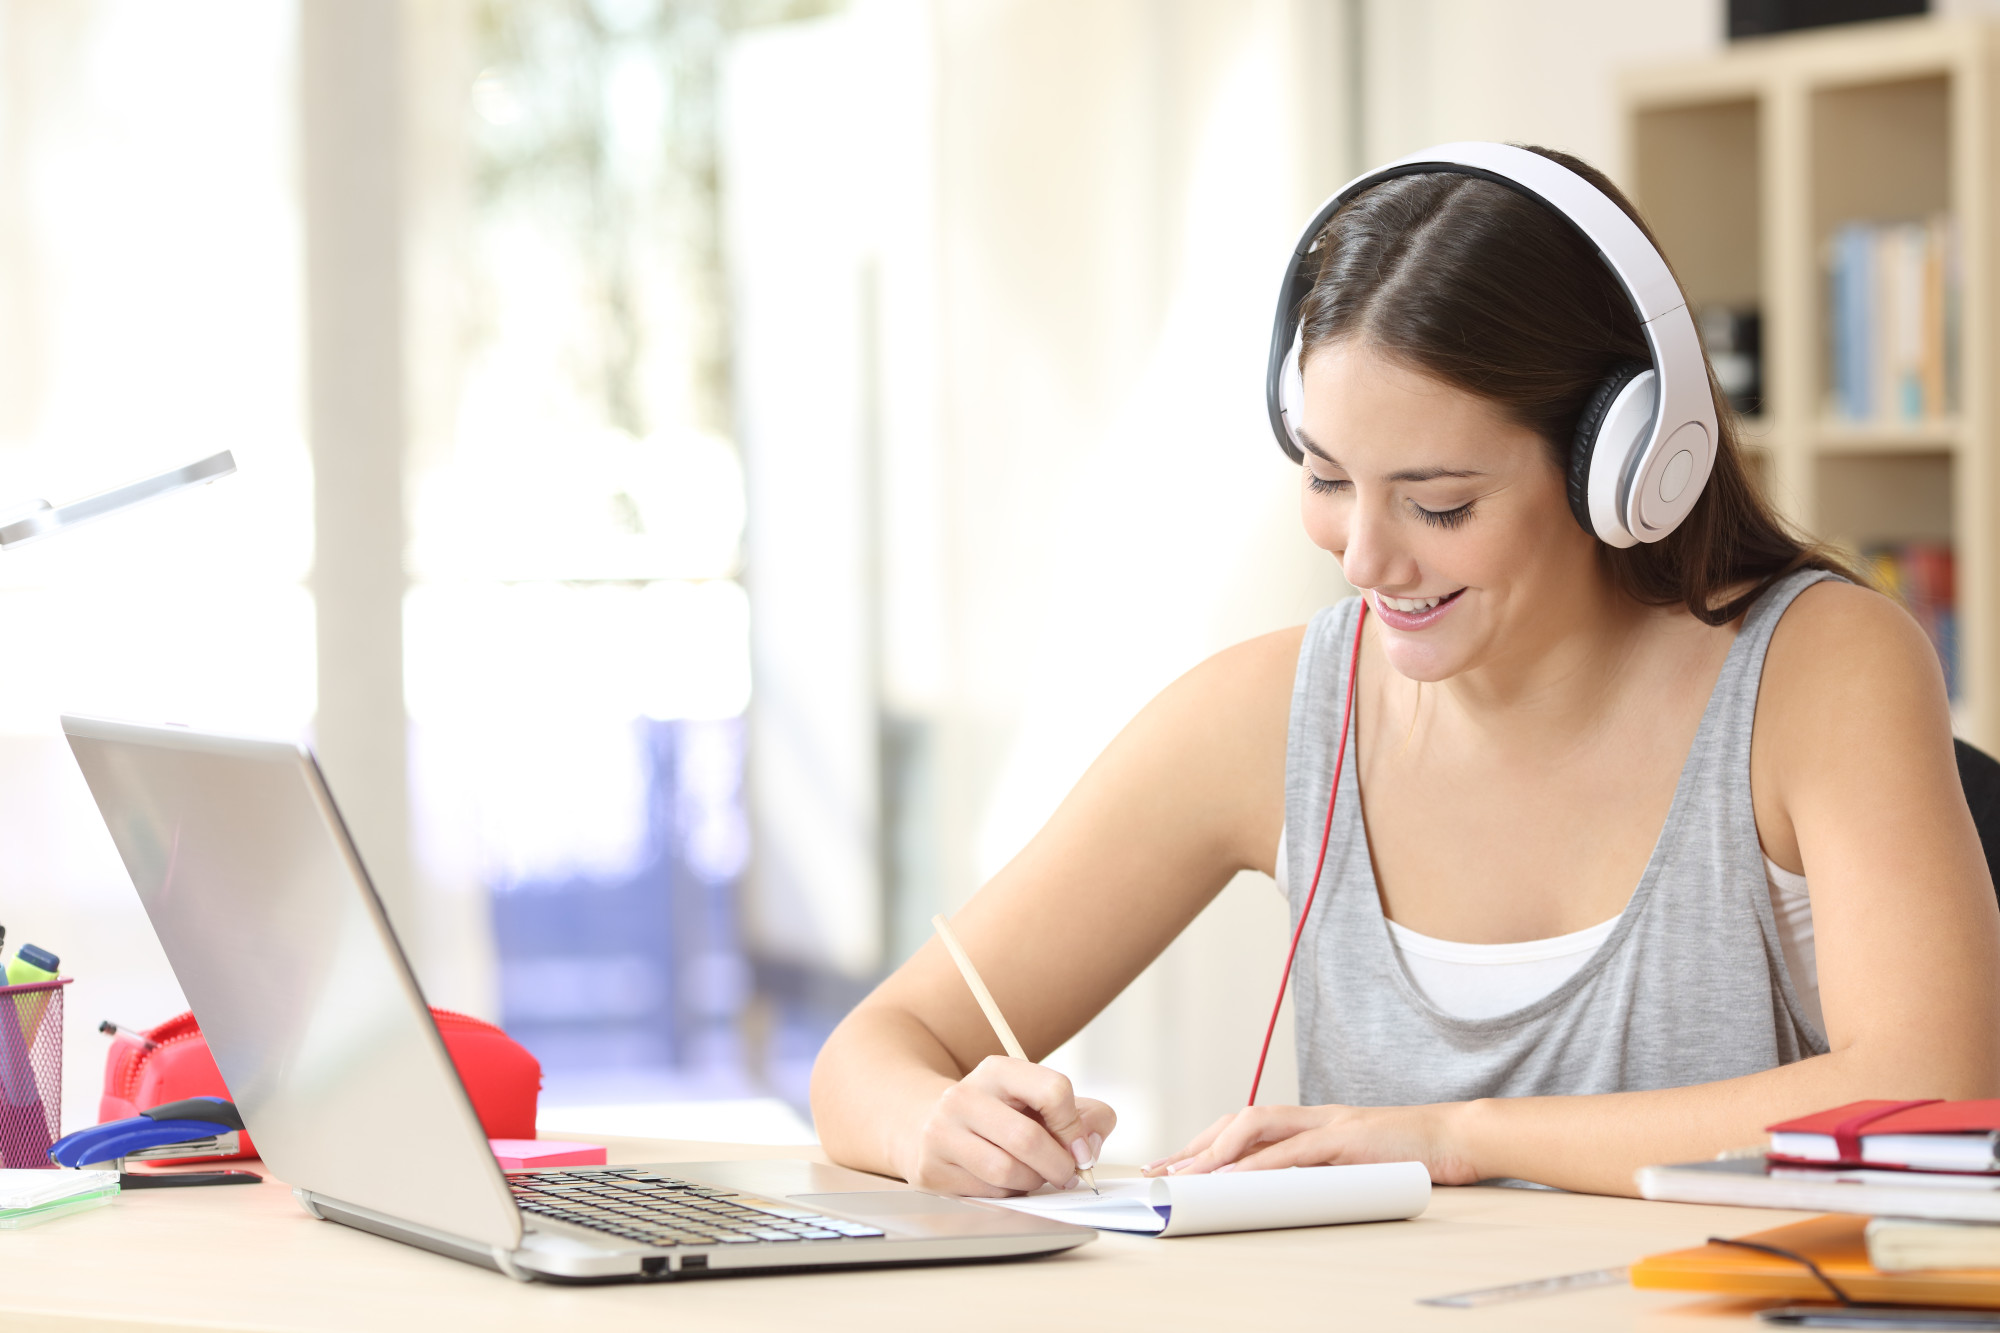 Live Online Tutoring: Instant Support in Math, Science, English & More